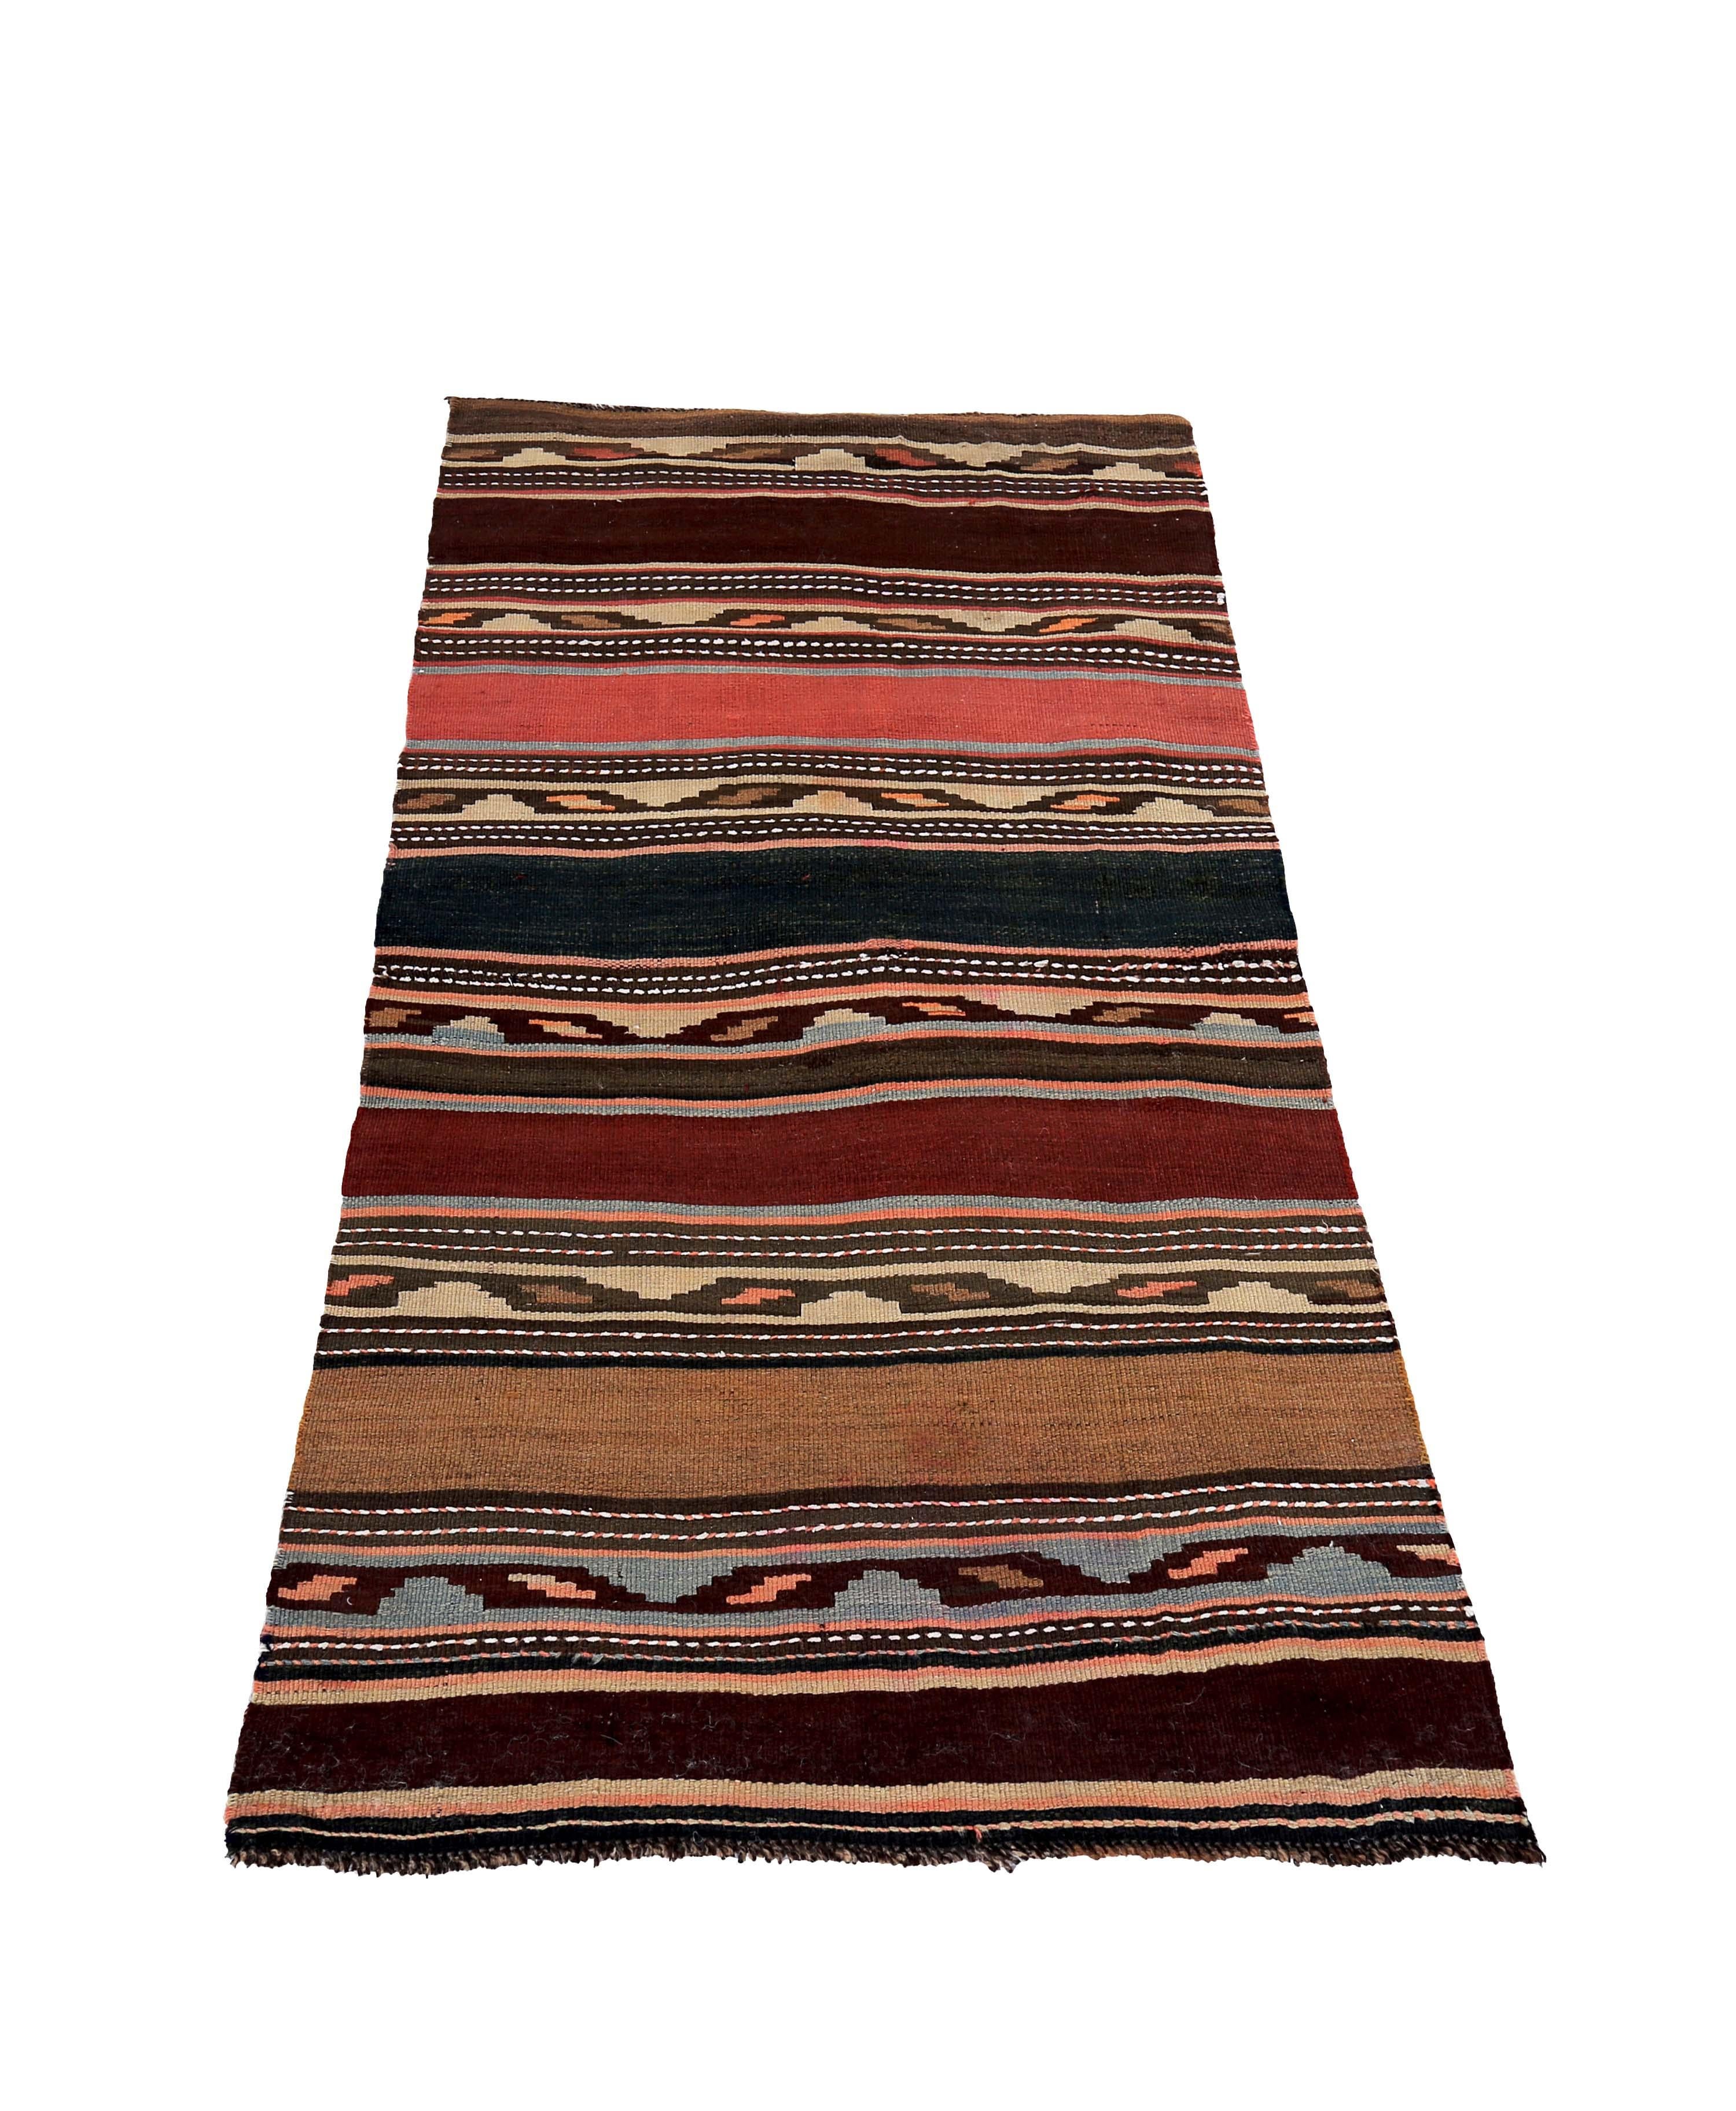 Turkish rug handwoven from the finest sheep’s wool and colored with all-natural vegetable dyes that are safe for humans and pets. It’s a traditional Kilim flat-weave design featuring brown, orange and beige tribal stripes. It’s a stunning piece to